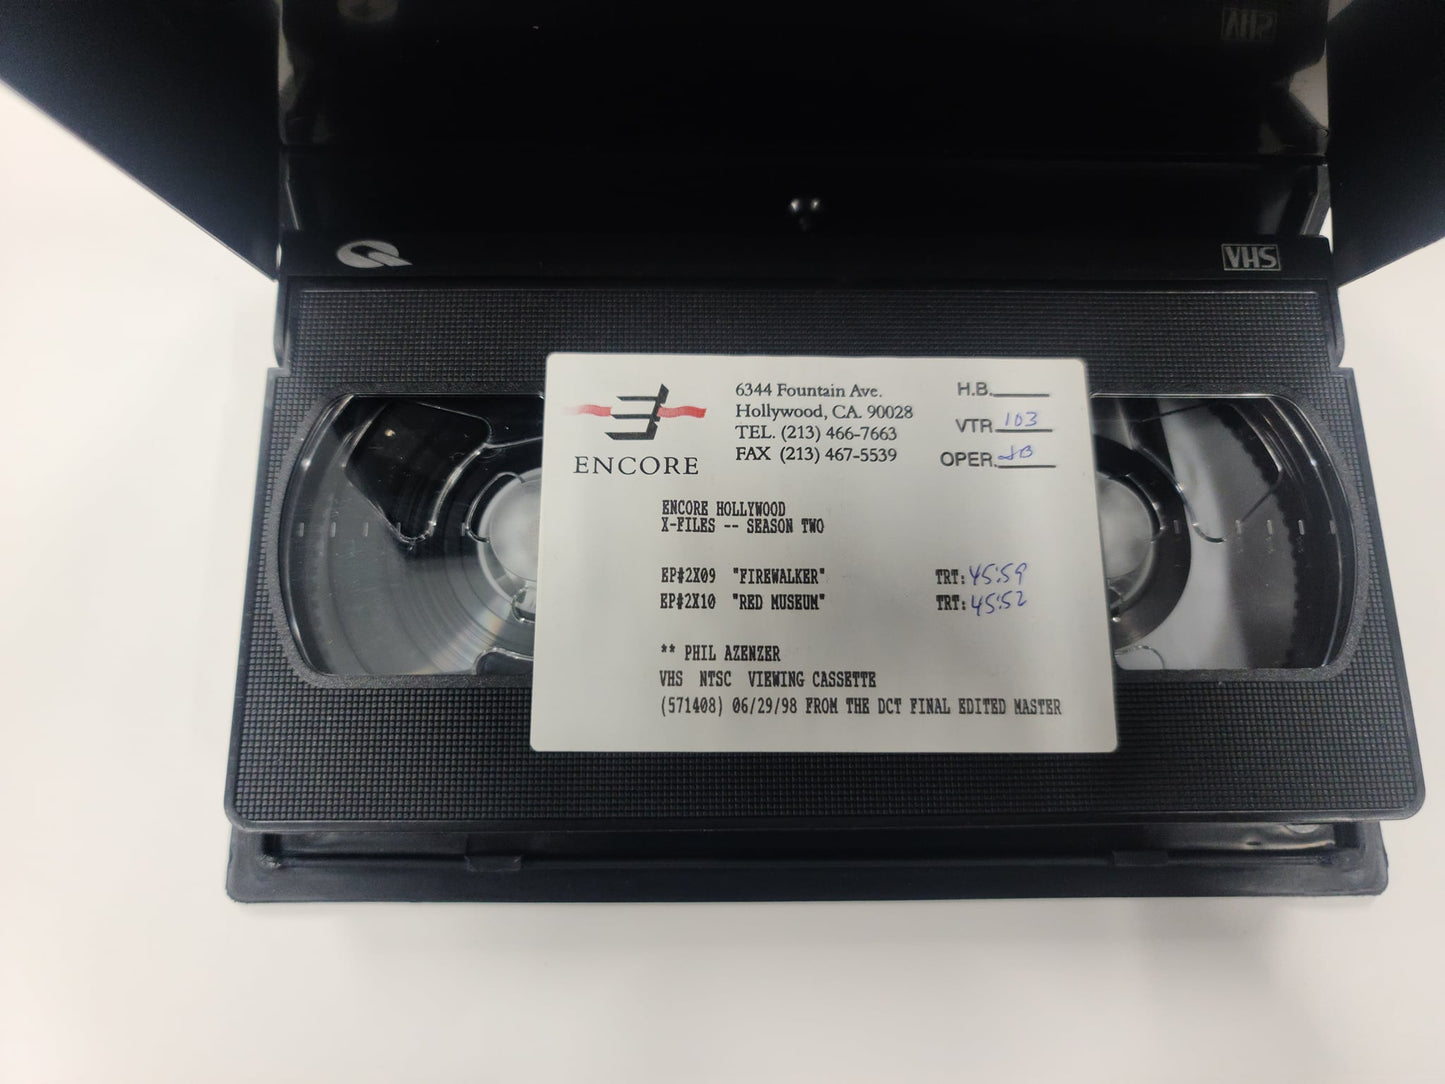 X-Files Screener Tape/ VHS - Episodes: " Firewalker" and "Red Museum"